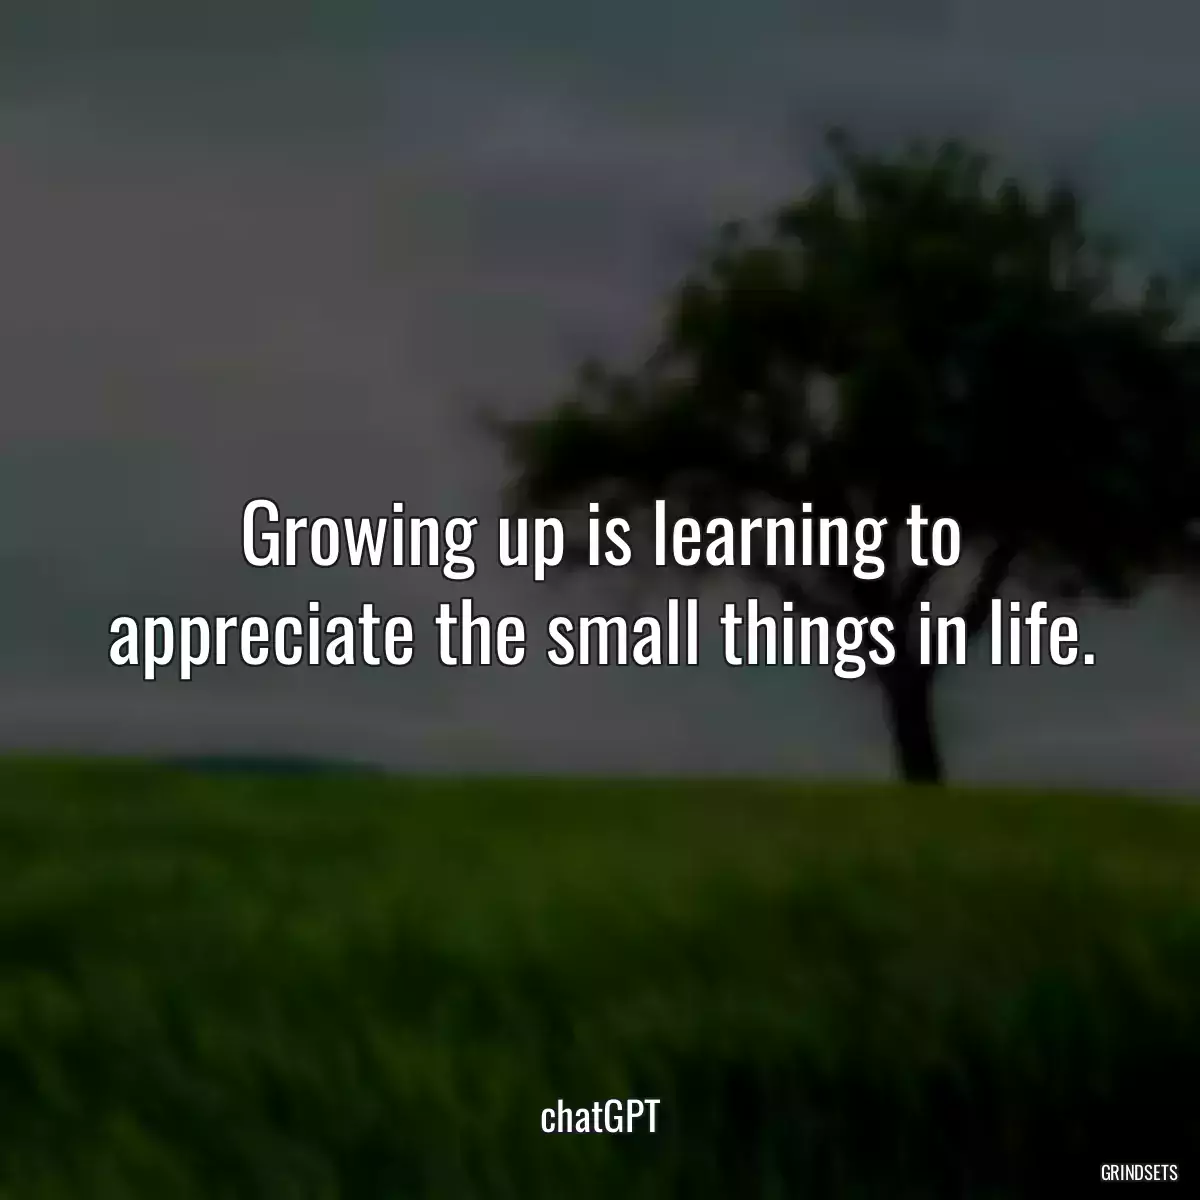 Growing up is learning to appreciate the small things in life.